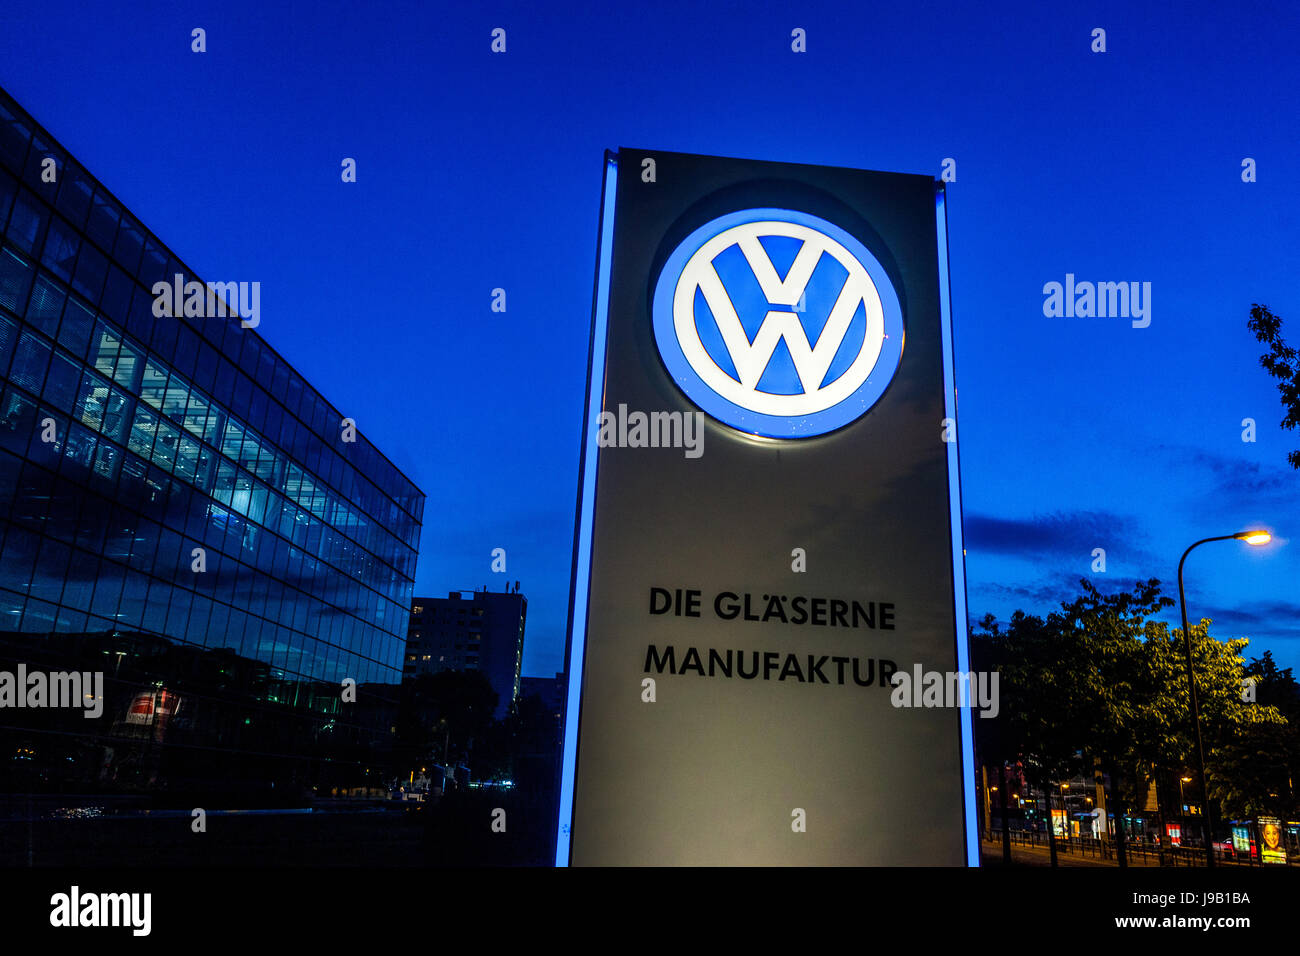 VW logo in front of Glaeserne Manufaktur, Transparent Factory, Volkswagen Factory, Auto manufacturing, Dresden, Saxony, Germany, Europe Stock Photo